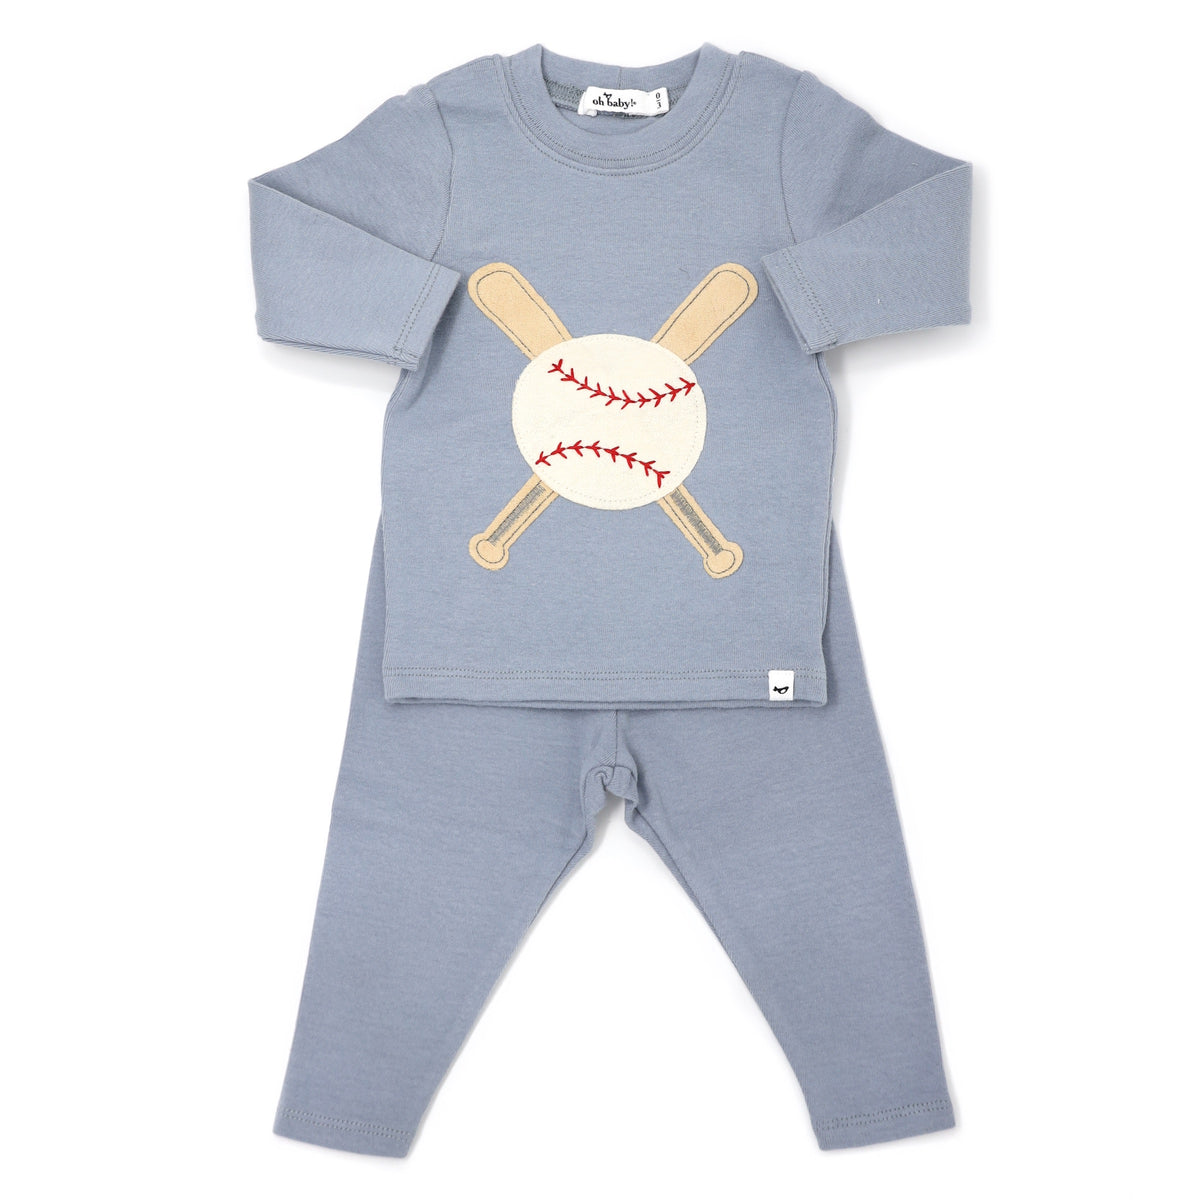 oh baby! Two Piece Set - Terry Baseball - Fog